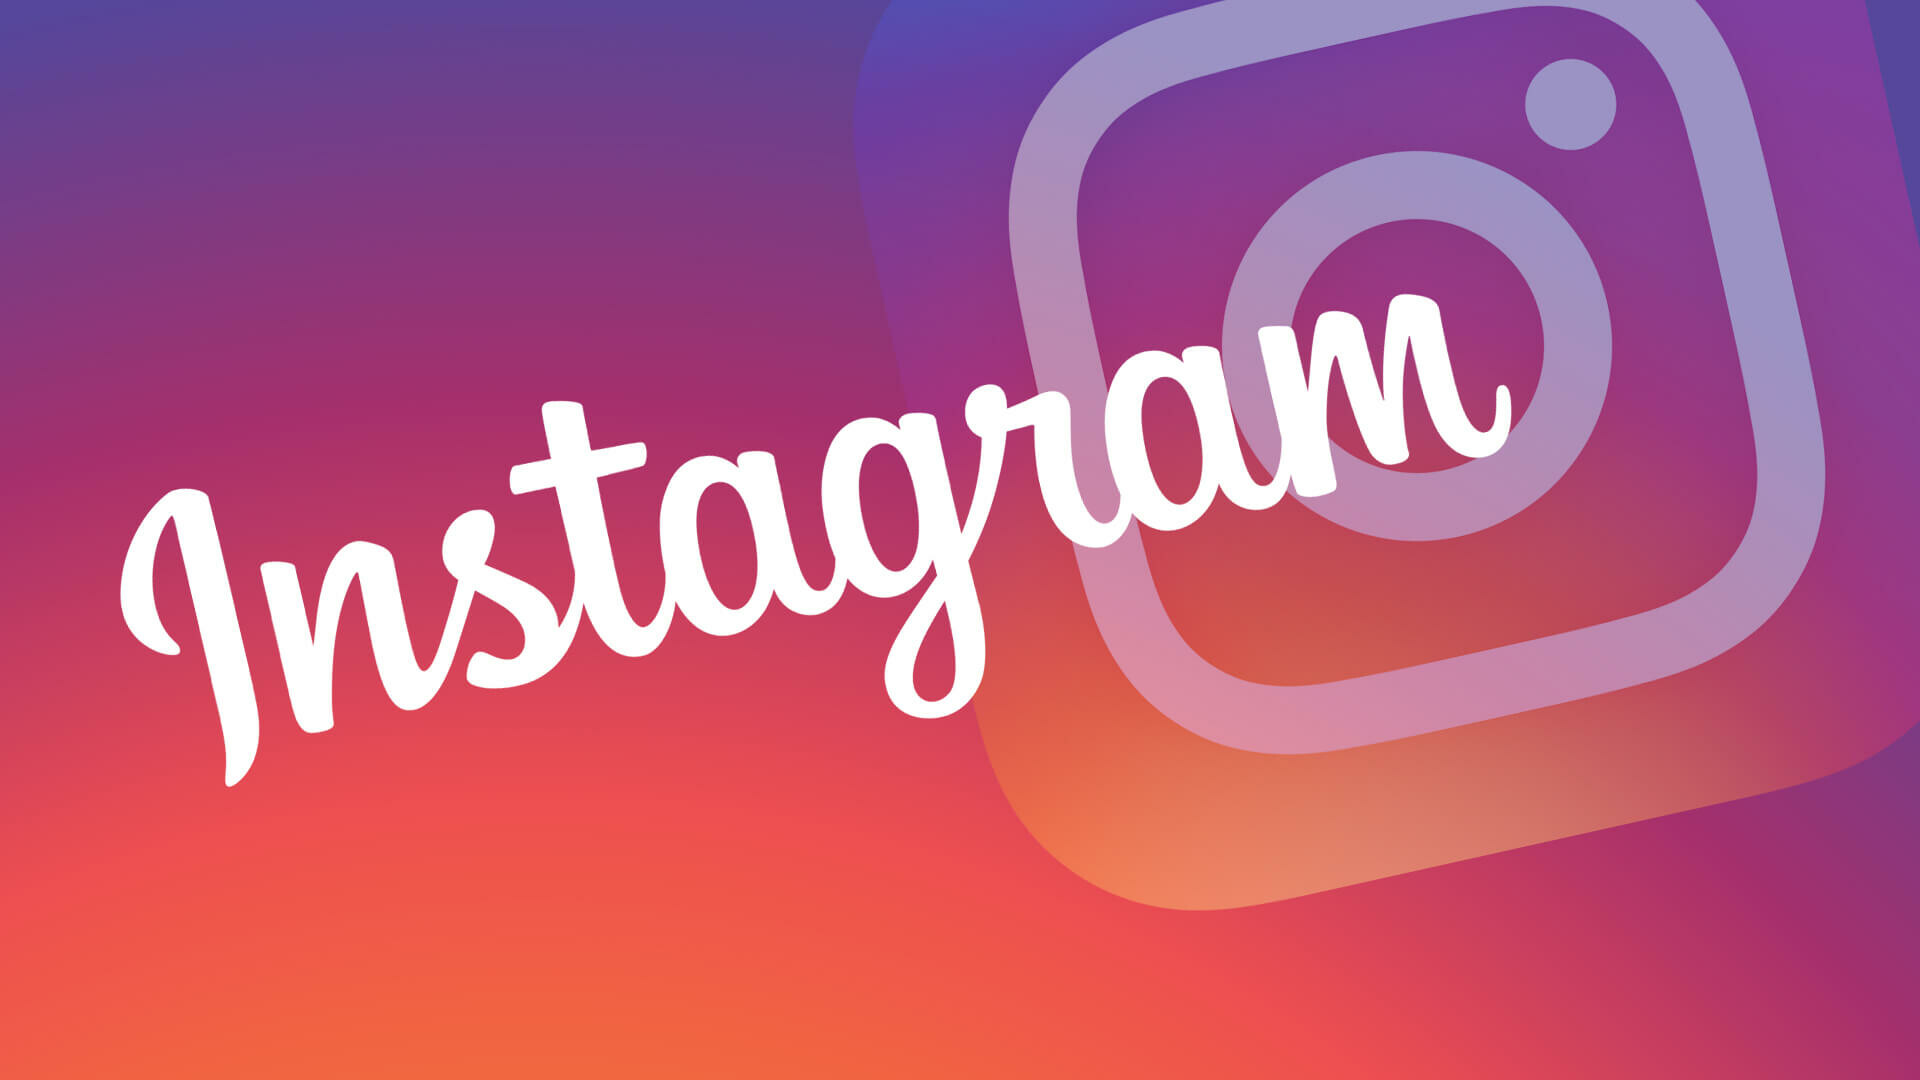 Instagram: App for sharing photos instantly, Logo. 1920x1080 Full HD Background.